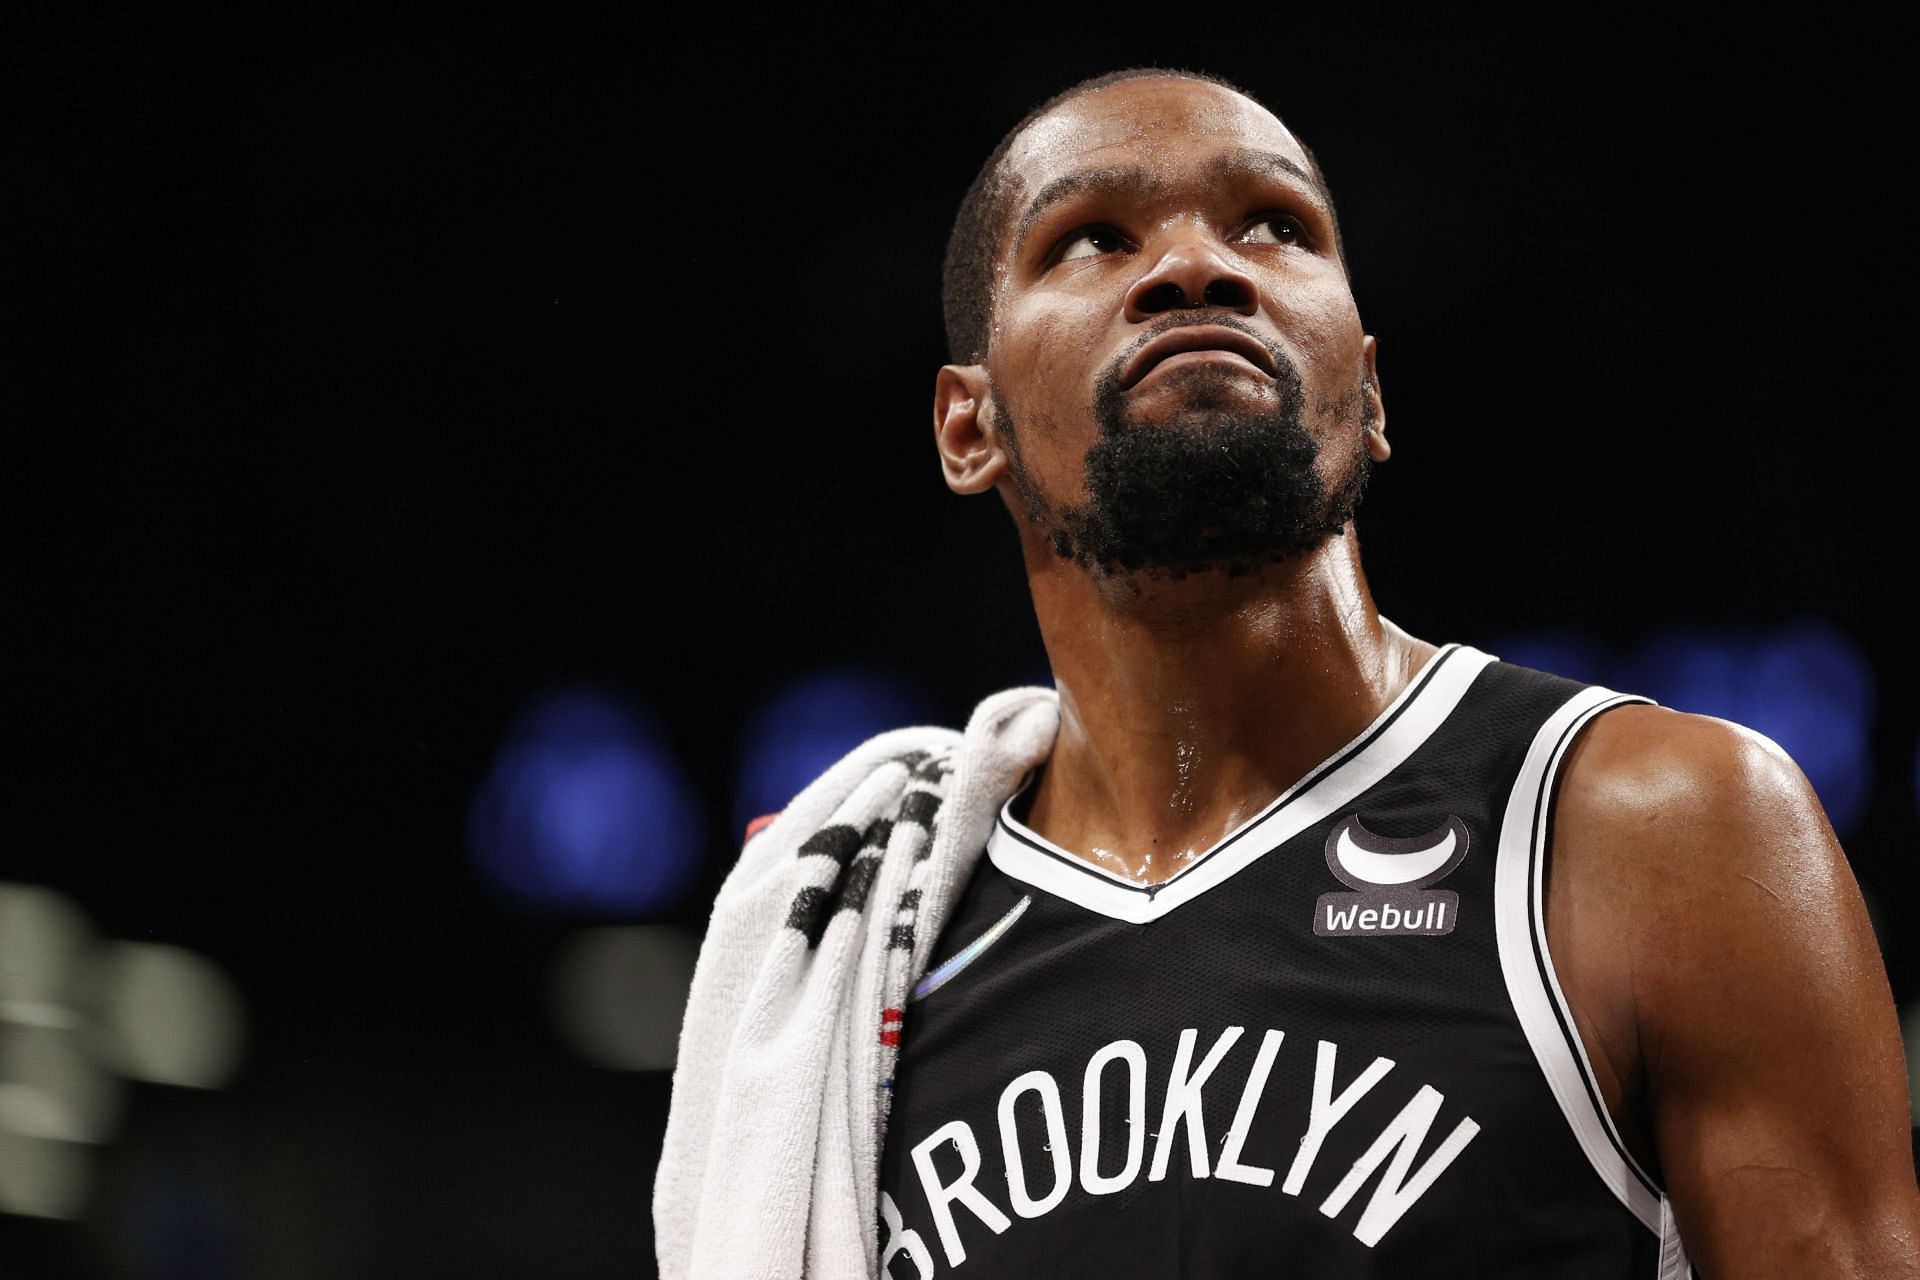 KD of the Brooklyn Nets requested a trade this offseason.